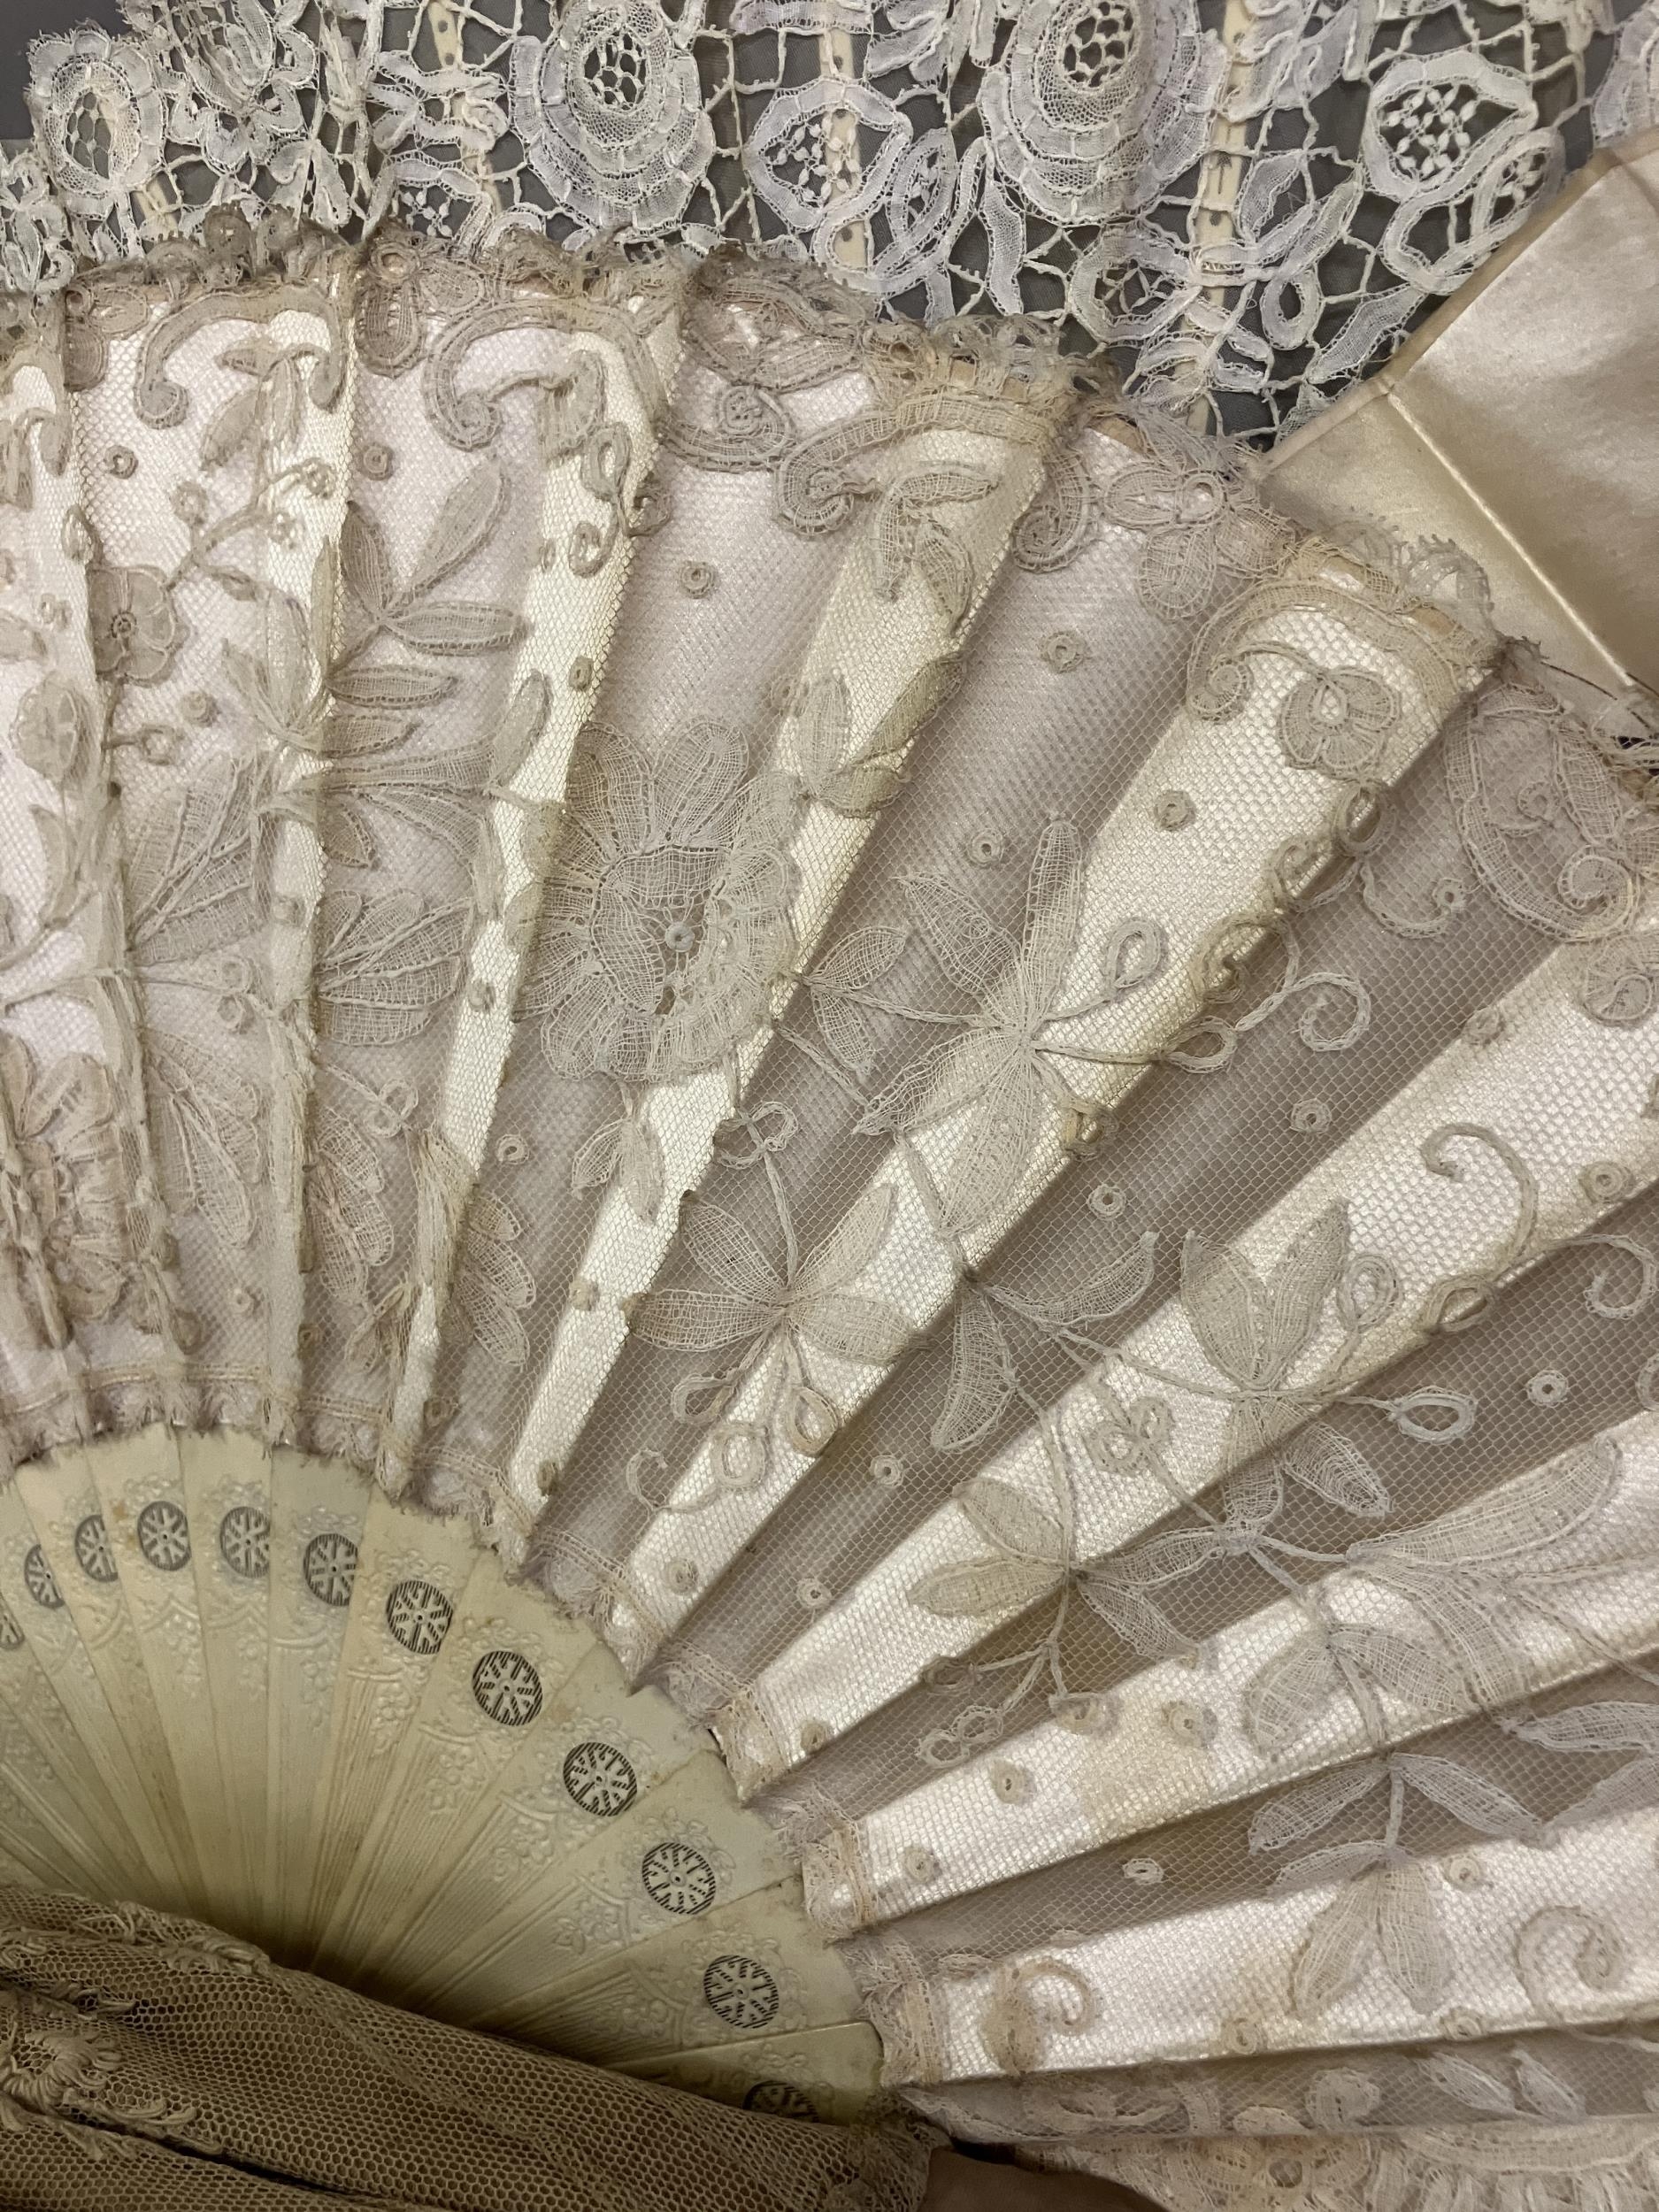 Fans and accessories, late 19th century to early 20th century: Four fans, the first with cream - Image 2 of 3